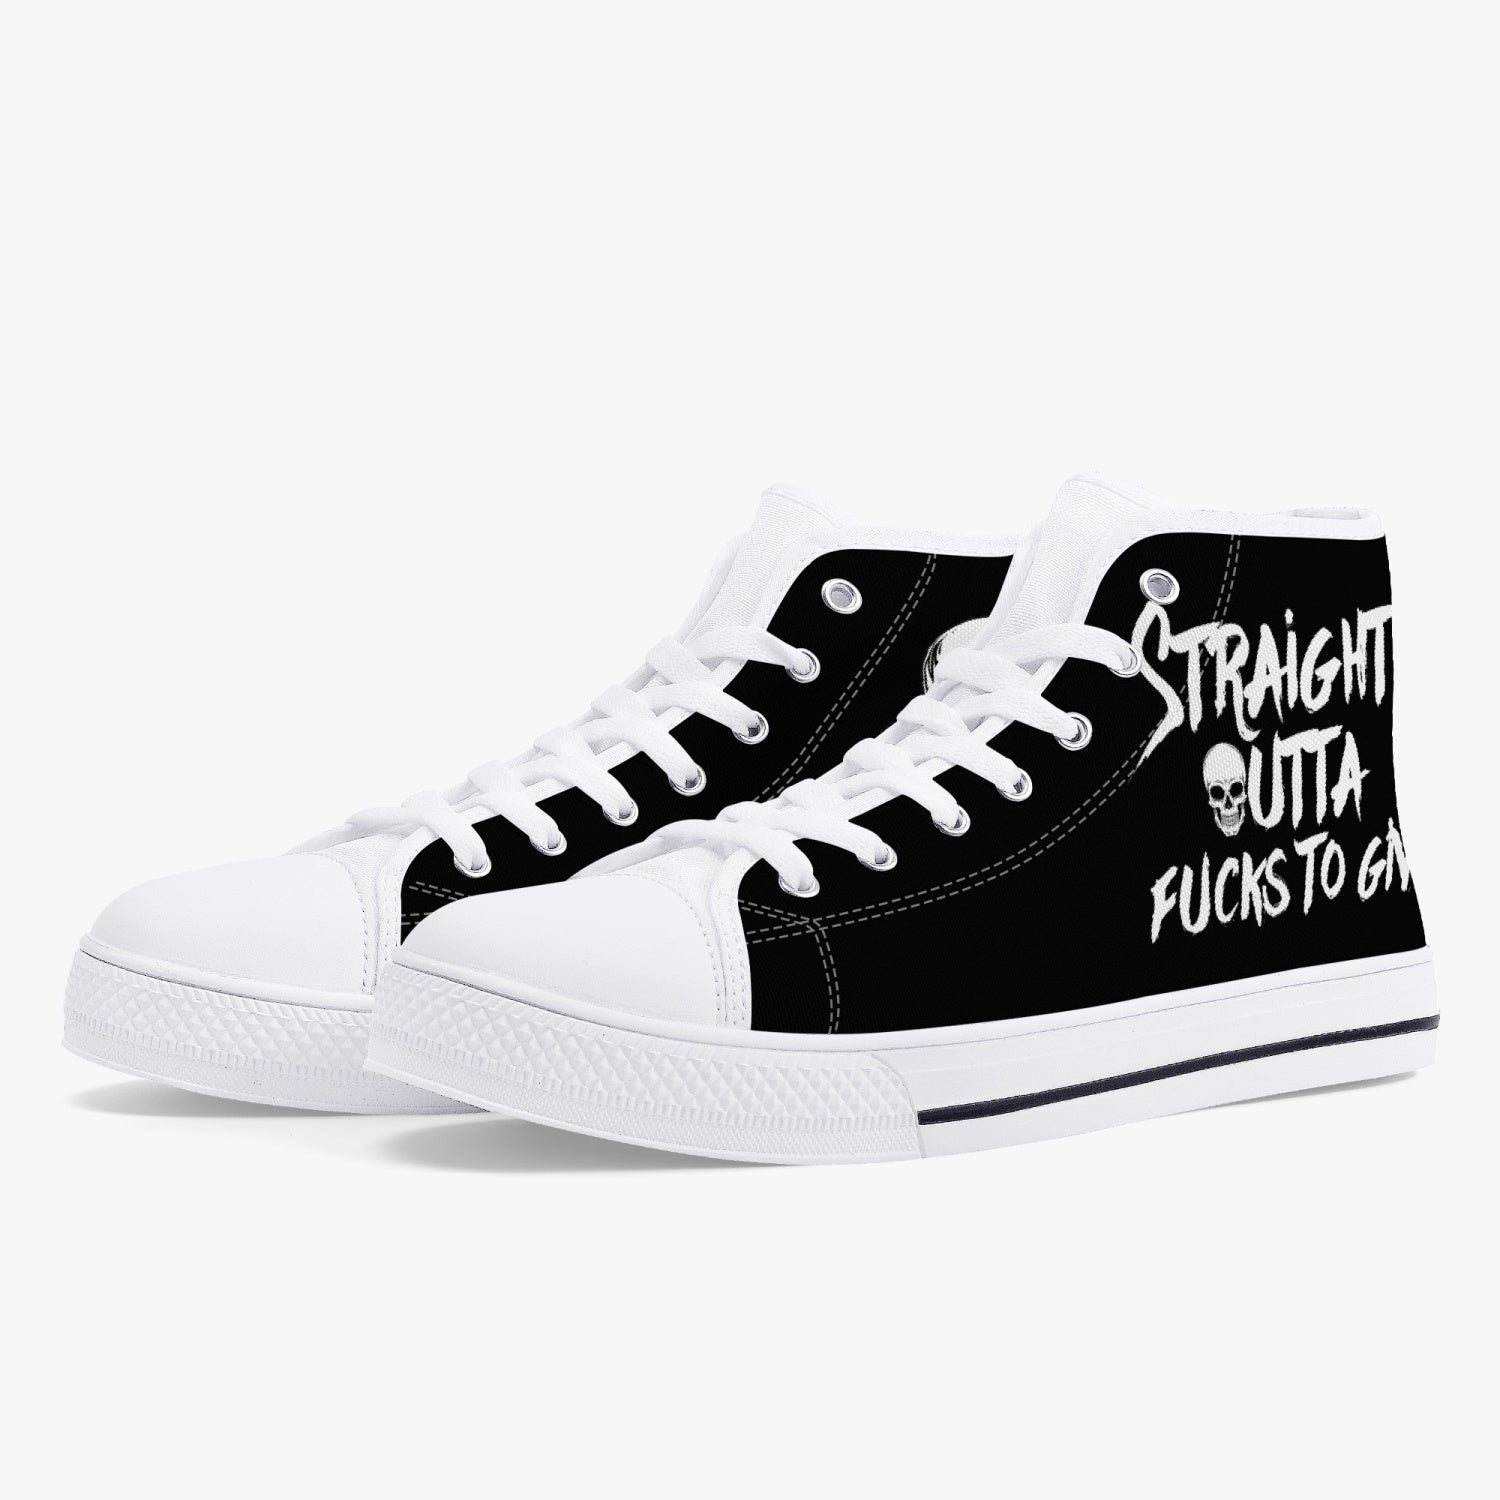 STRAIGHT OUTTA F TO GIVE HIGH TOP CANVAS SHOES - TY1010222